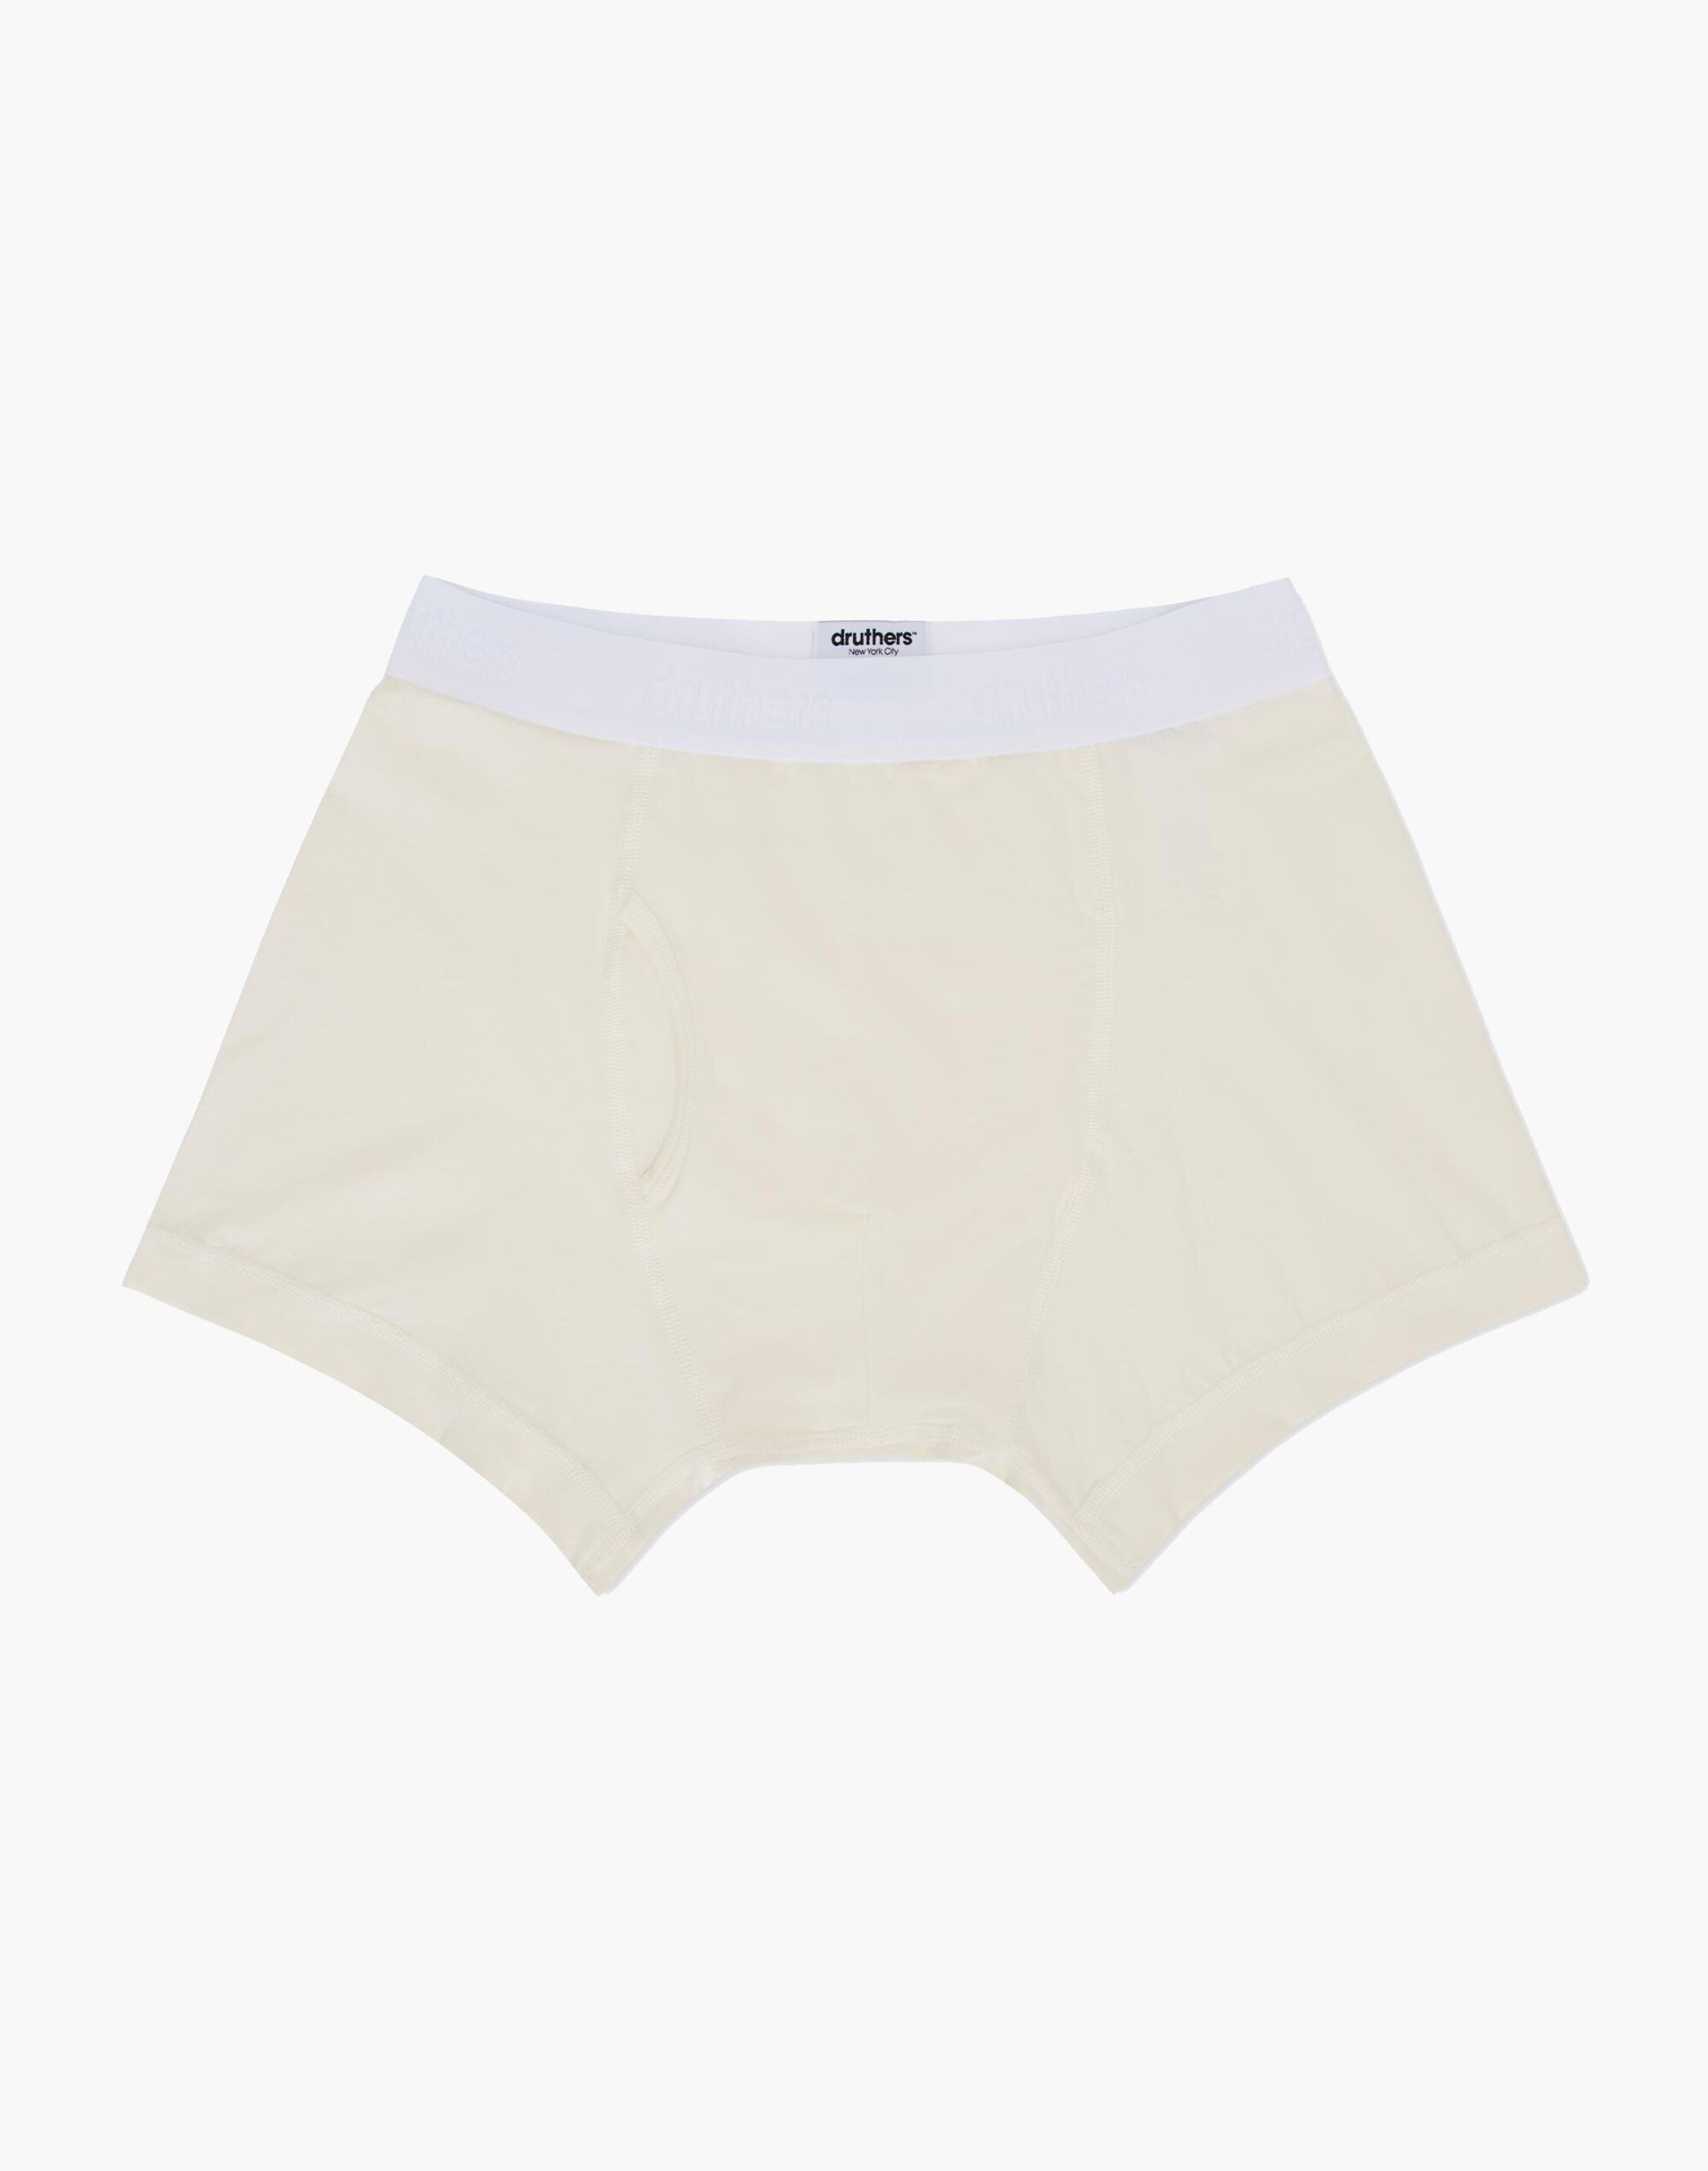 Madewell Druthers NYC Organic Cotton Boxer Briefs The Summit at Fritz Farm